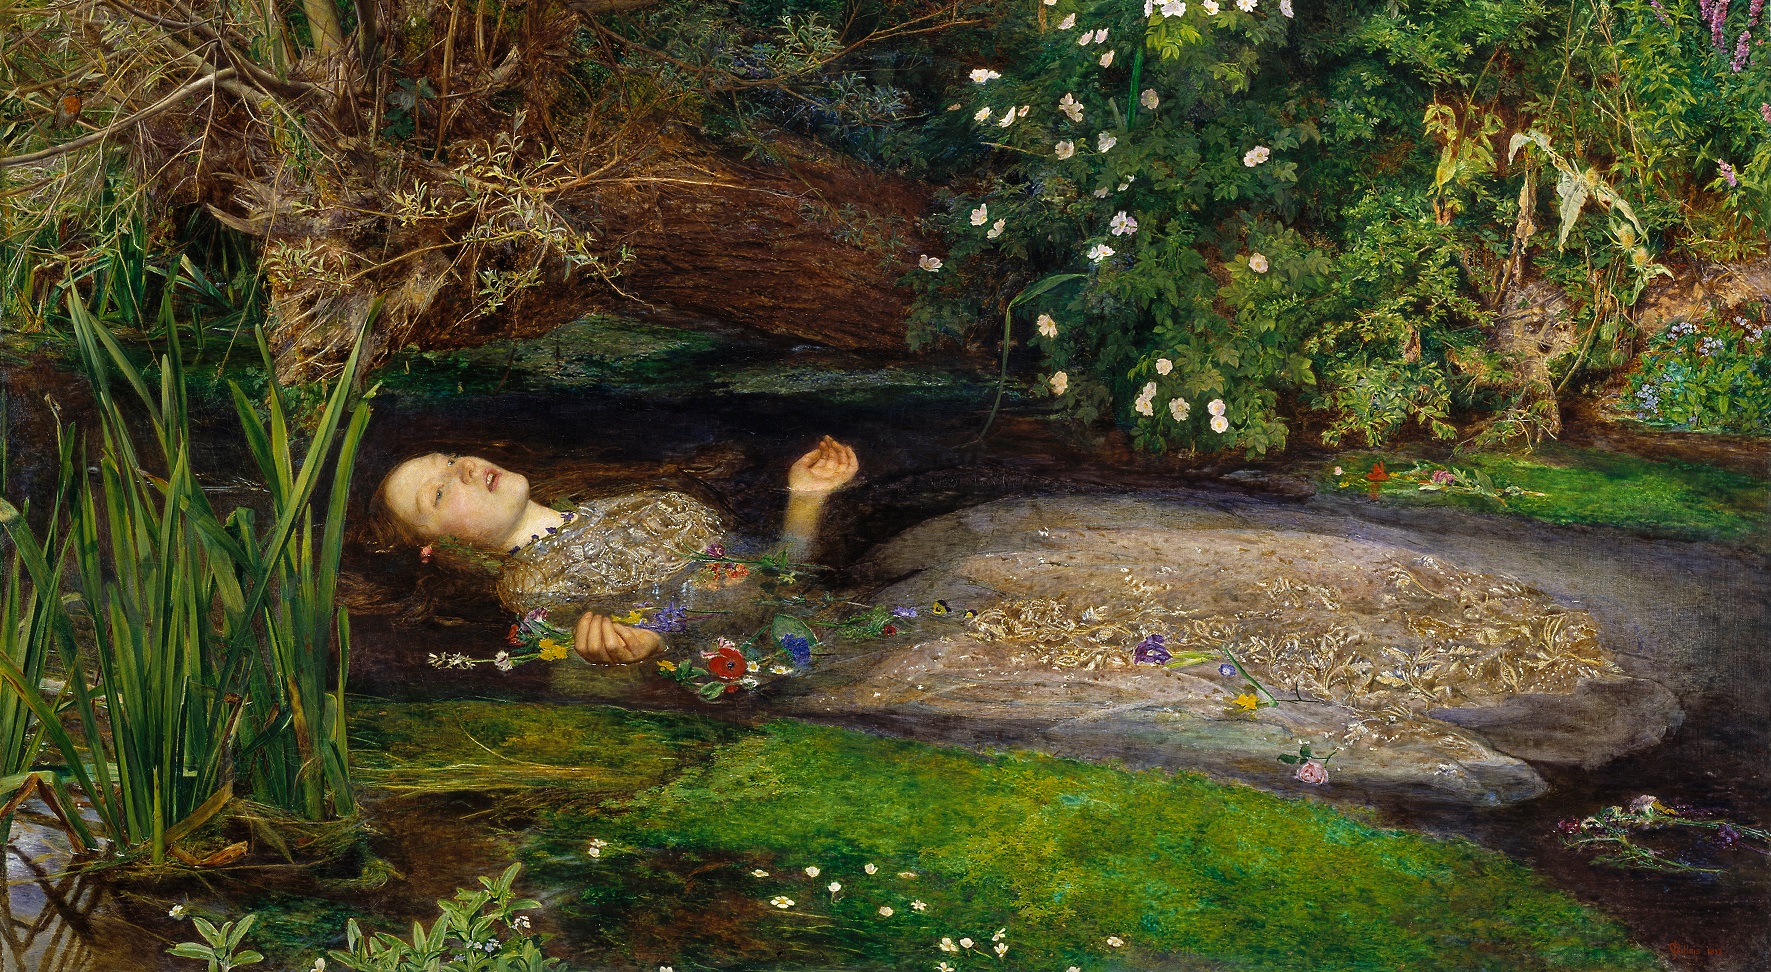 Oil painting of a dead woman floating face up in a detailed gown in the river. She is surrounded by plants in the river and on the riverbank.